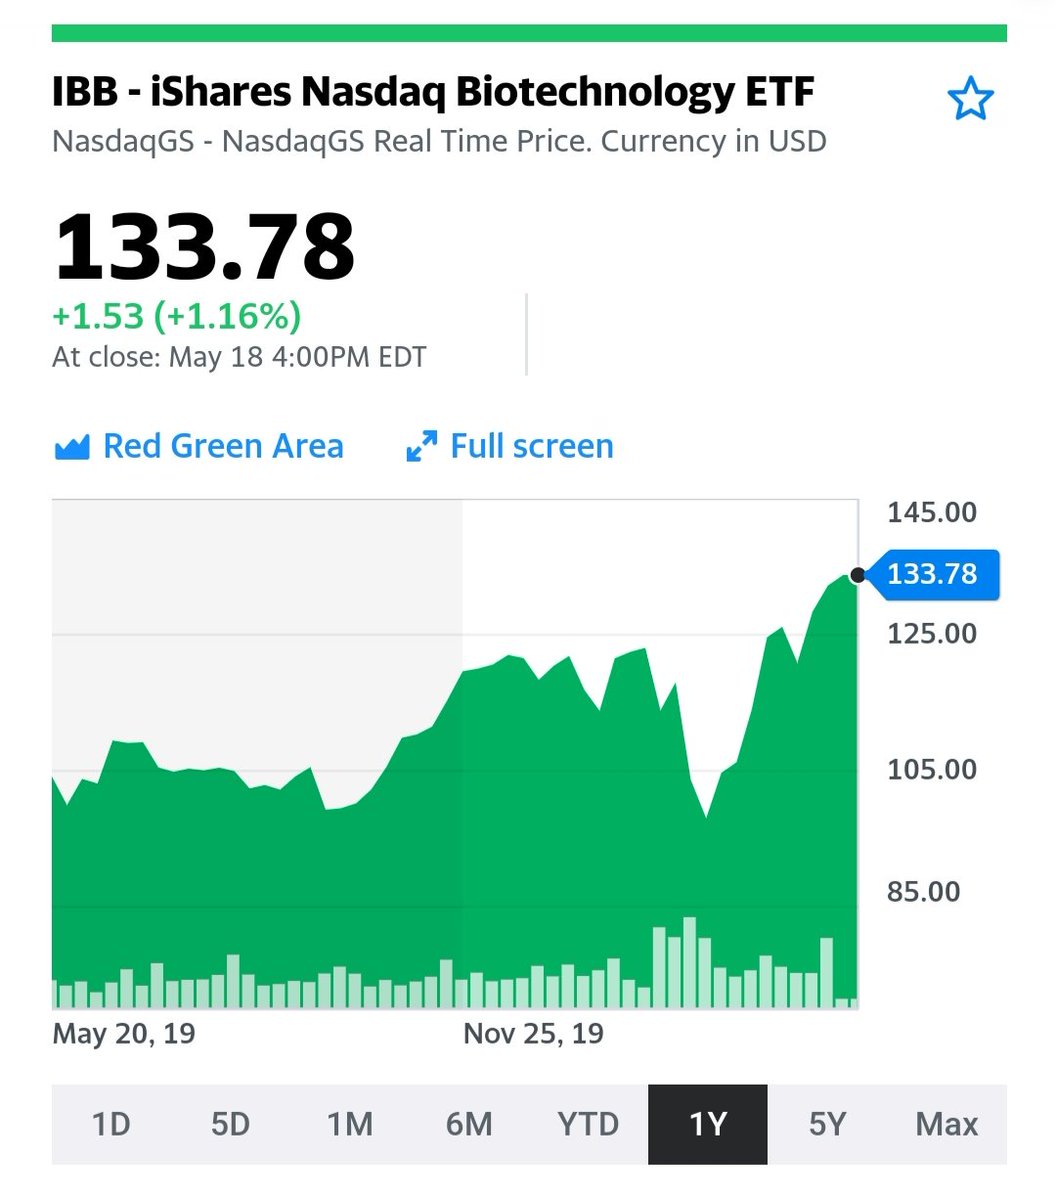 Emhoff has up to $15,000 invested in a iShares Nasdaq Biotechnology fund, with notable holdings including Gilead Sciences, Amgen, and Biogen.